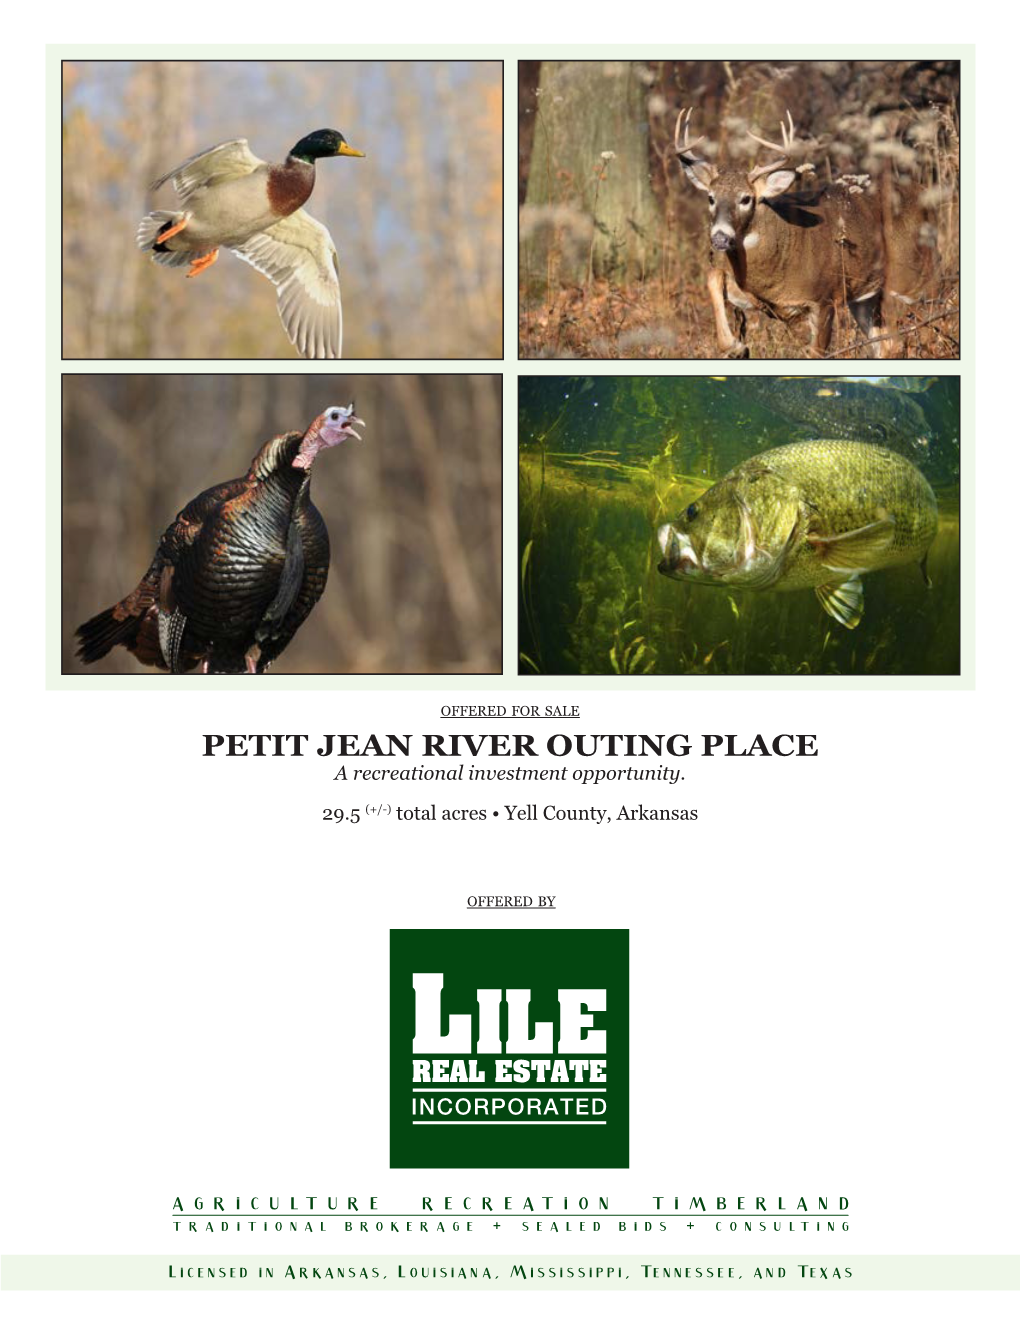 PETIT JEAN RIVER OUTING PLACE a Recreational Investment Opportunity